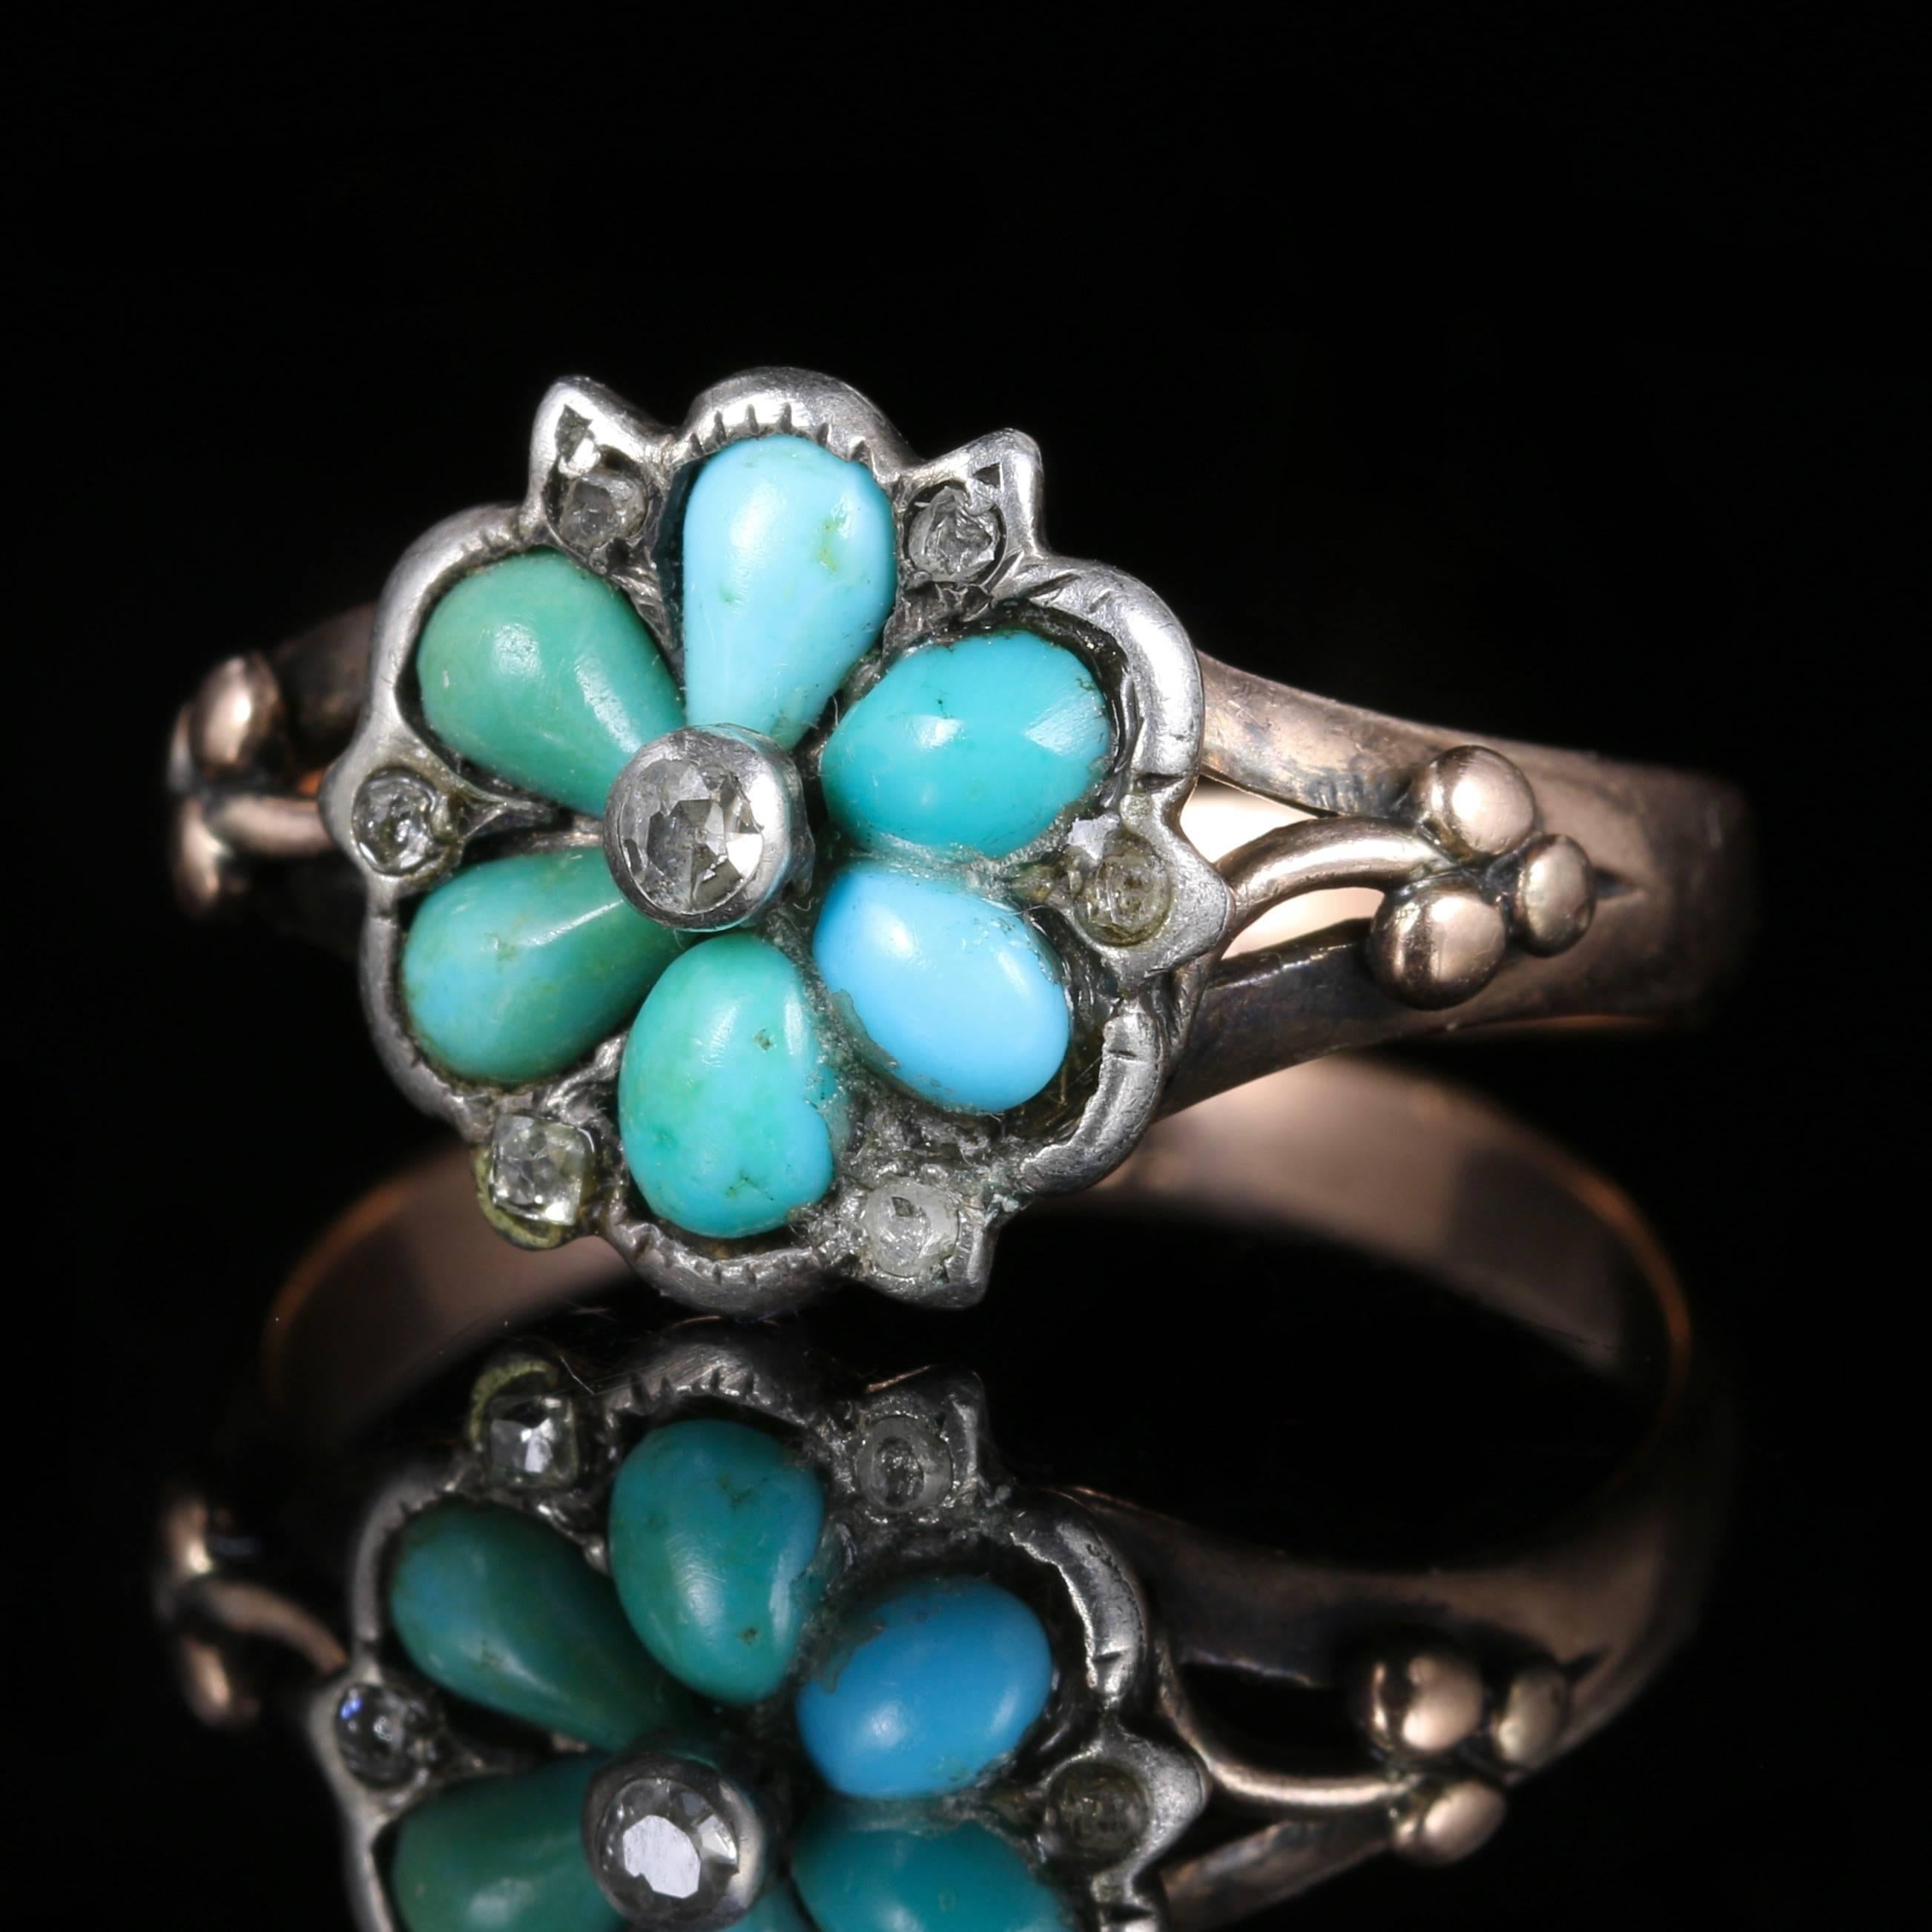 This fabulous genuine Georgian antique ring is from the 1830’s, set in 18ct Yellow Gold.

Adorned with Turquoise stones and a halo of Diamonds surrounding, complimented with a central Diamond.

The Turquoise stone has healing properties, it protects